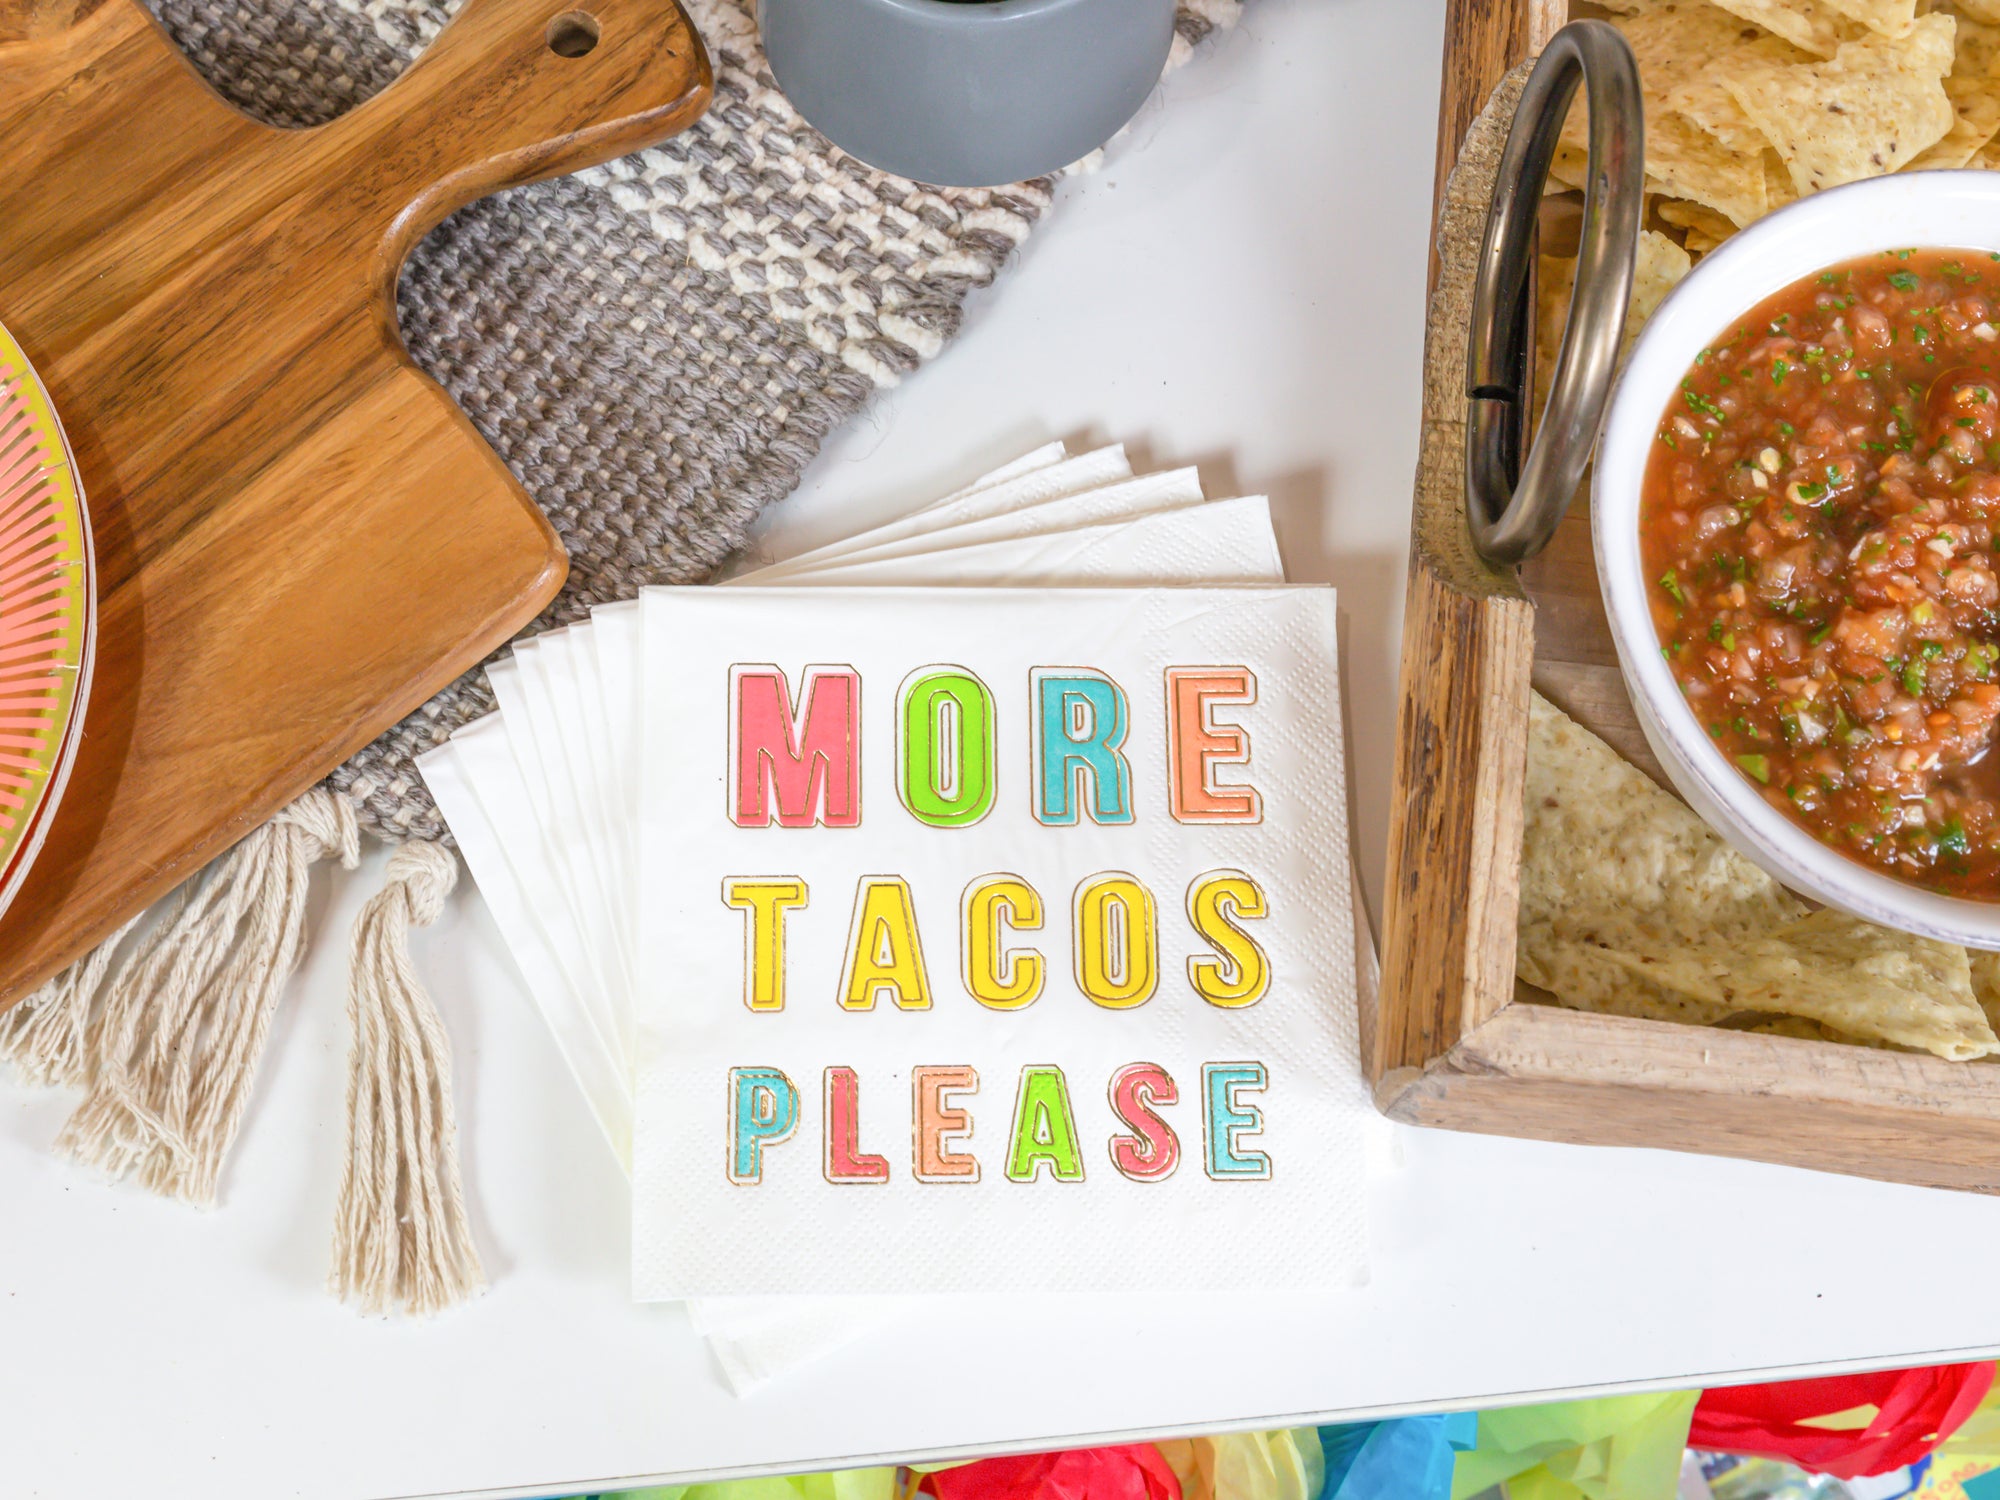 Get Inspired for Cinco de Mayo | The Party Darling